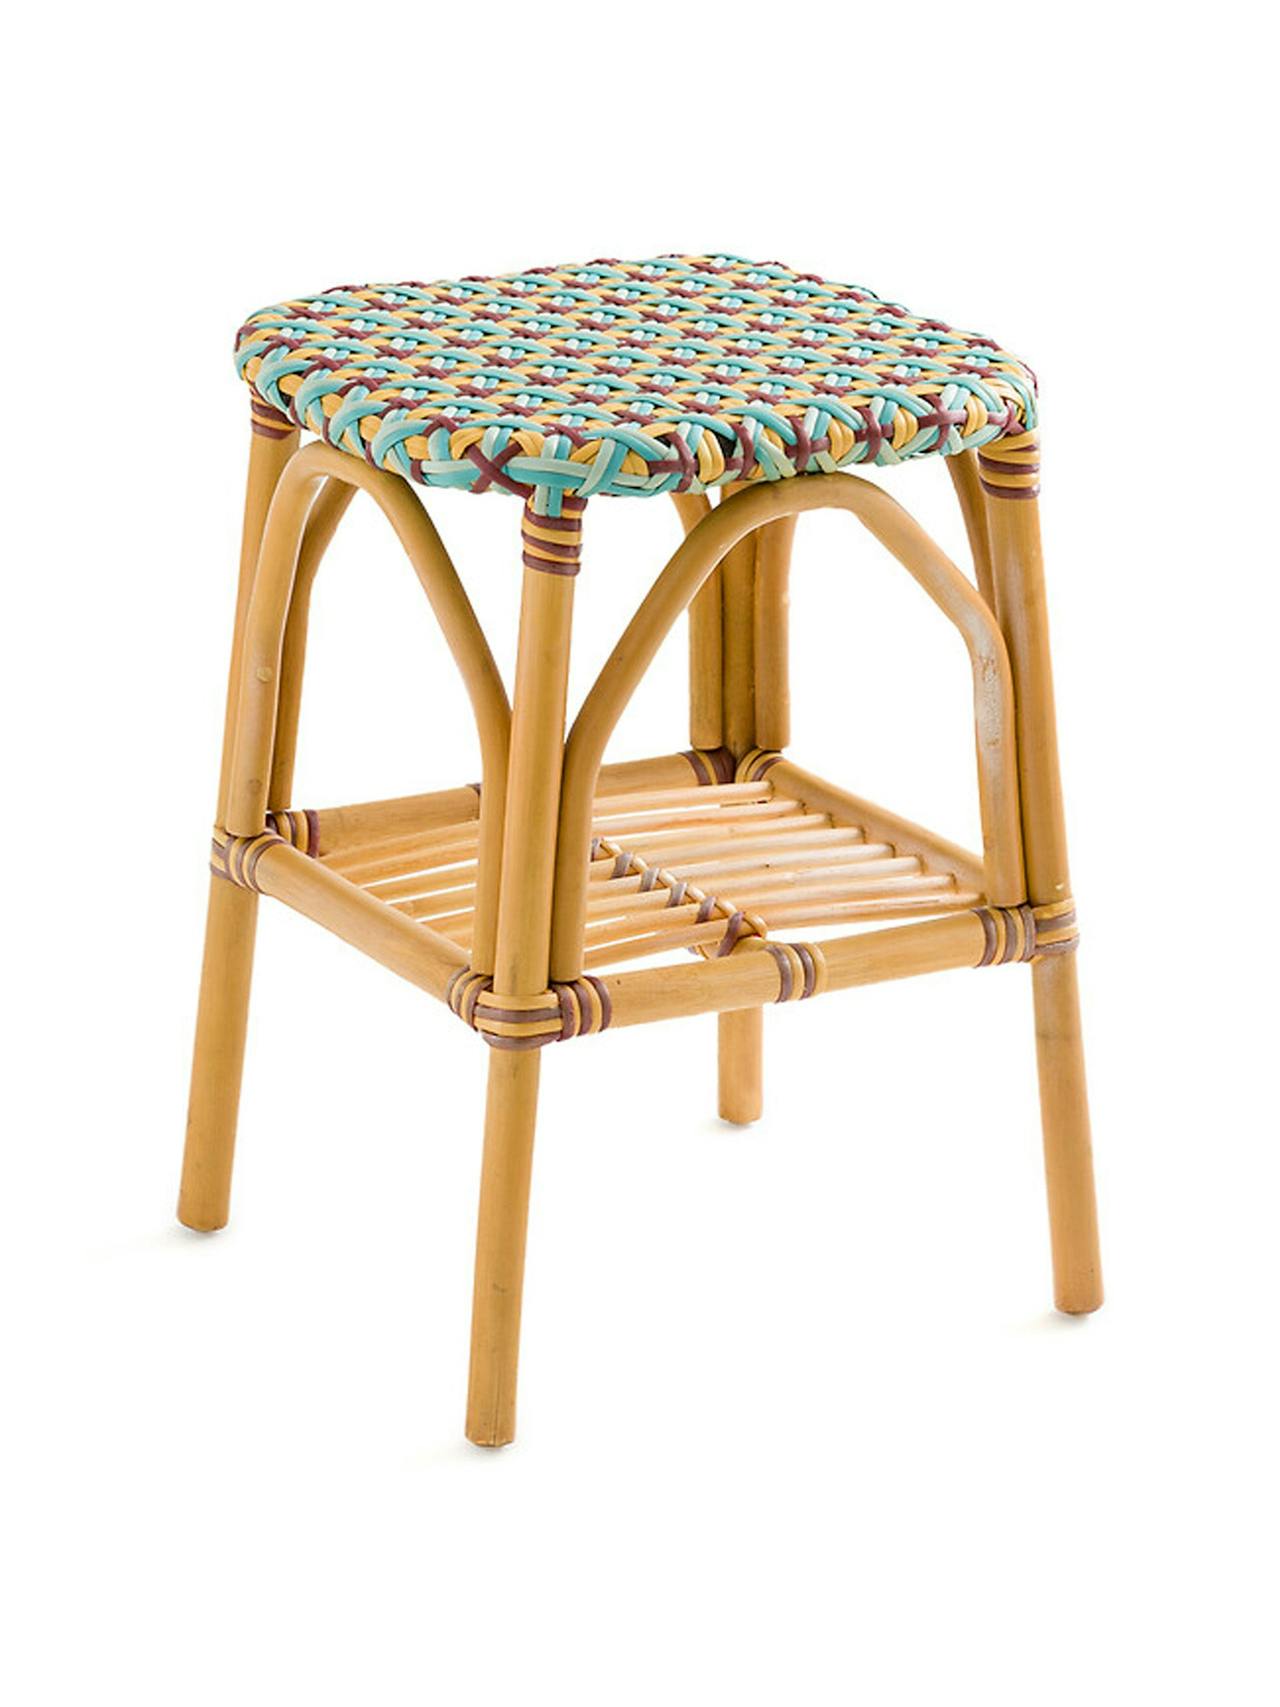 Musette rattan and weaving side table